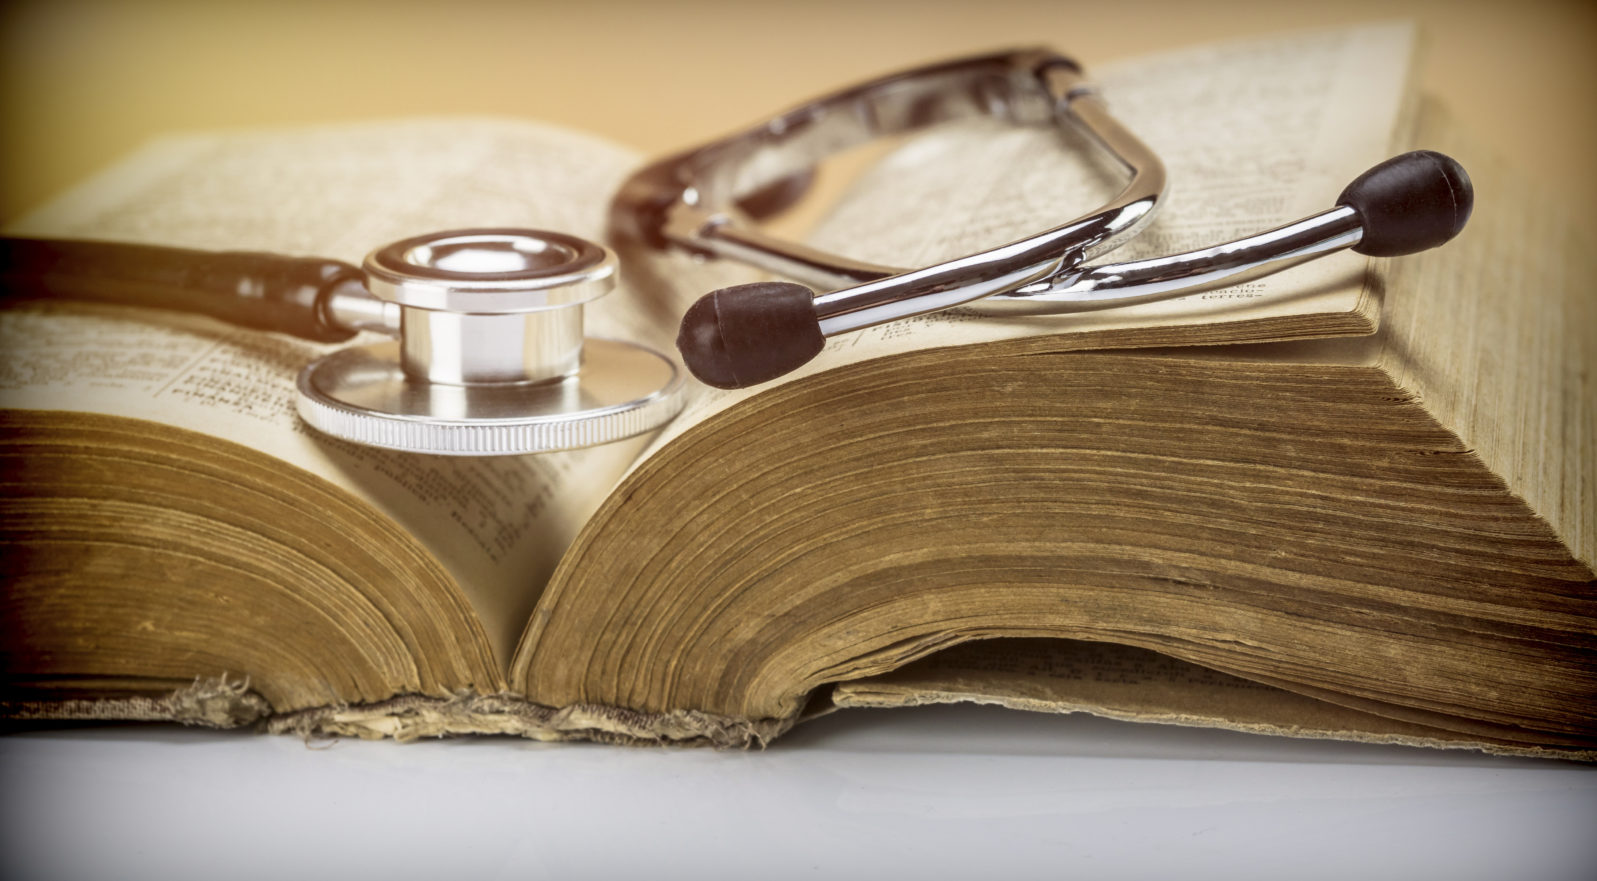 Stethoscope on an old book of medicine, conceptual image